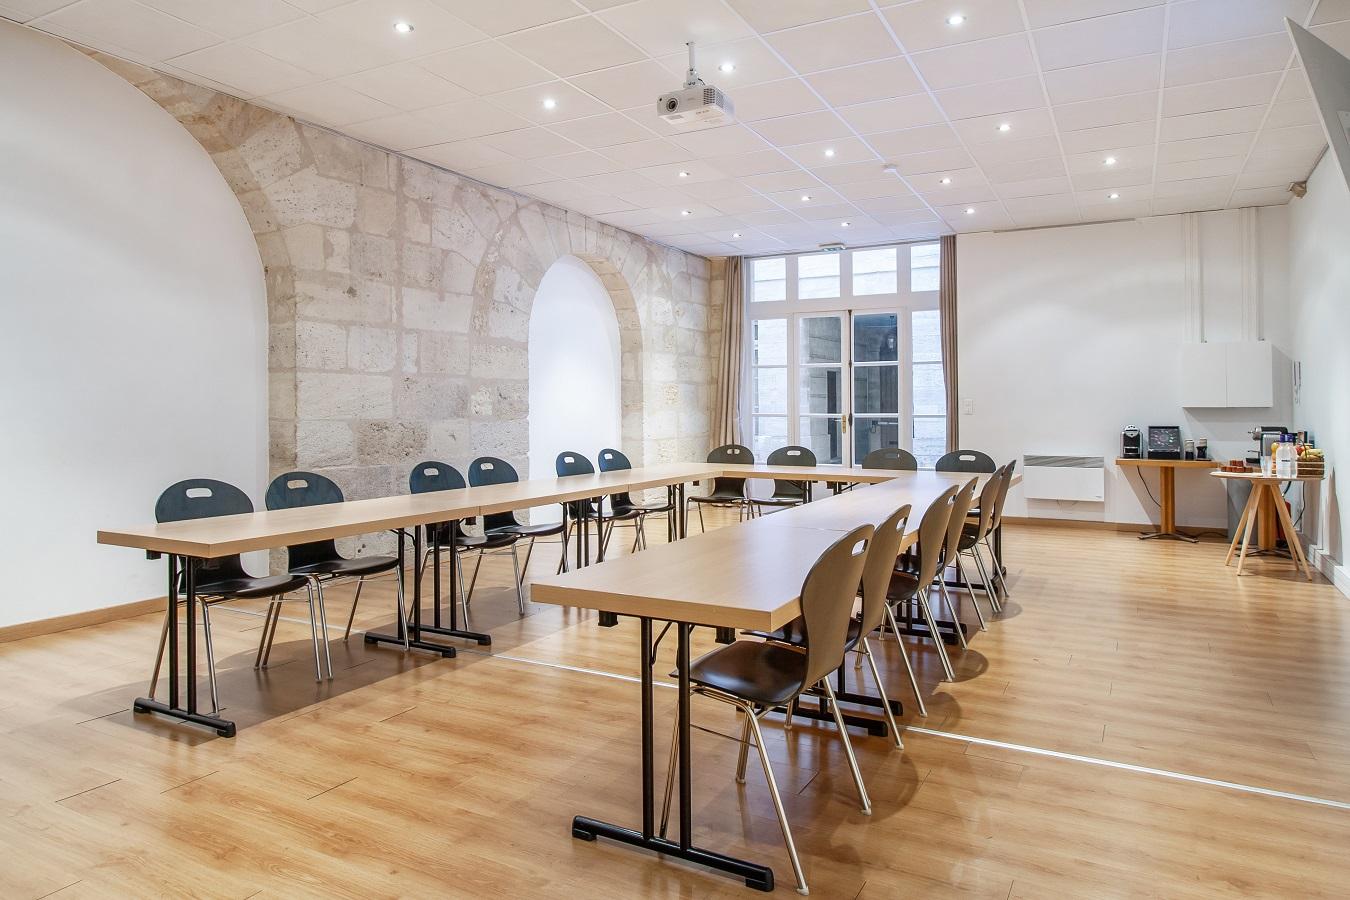 Your seminar in a town house on the Cours - Bordeaux